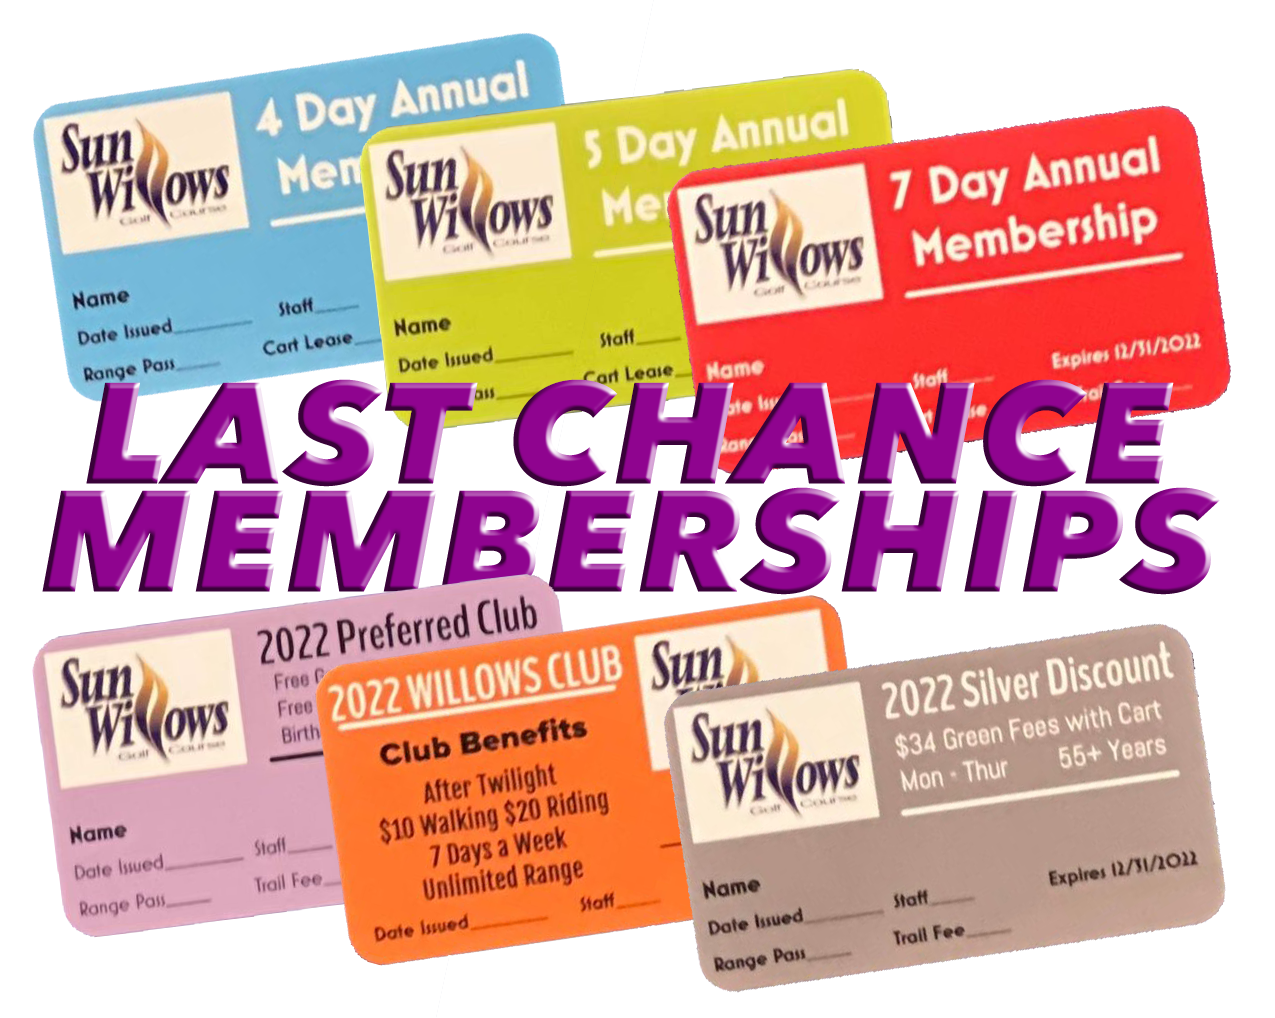 Last Chance Memberships with images of membership and discount cards offered